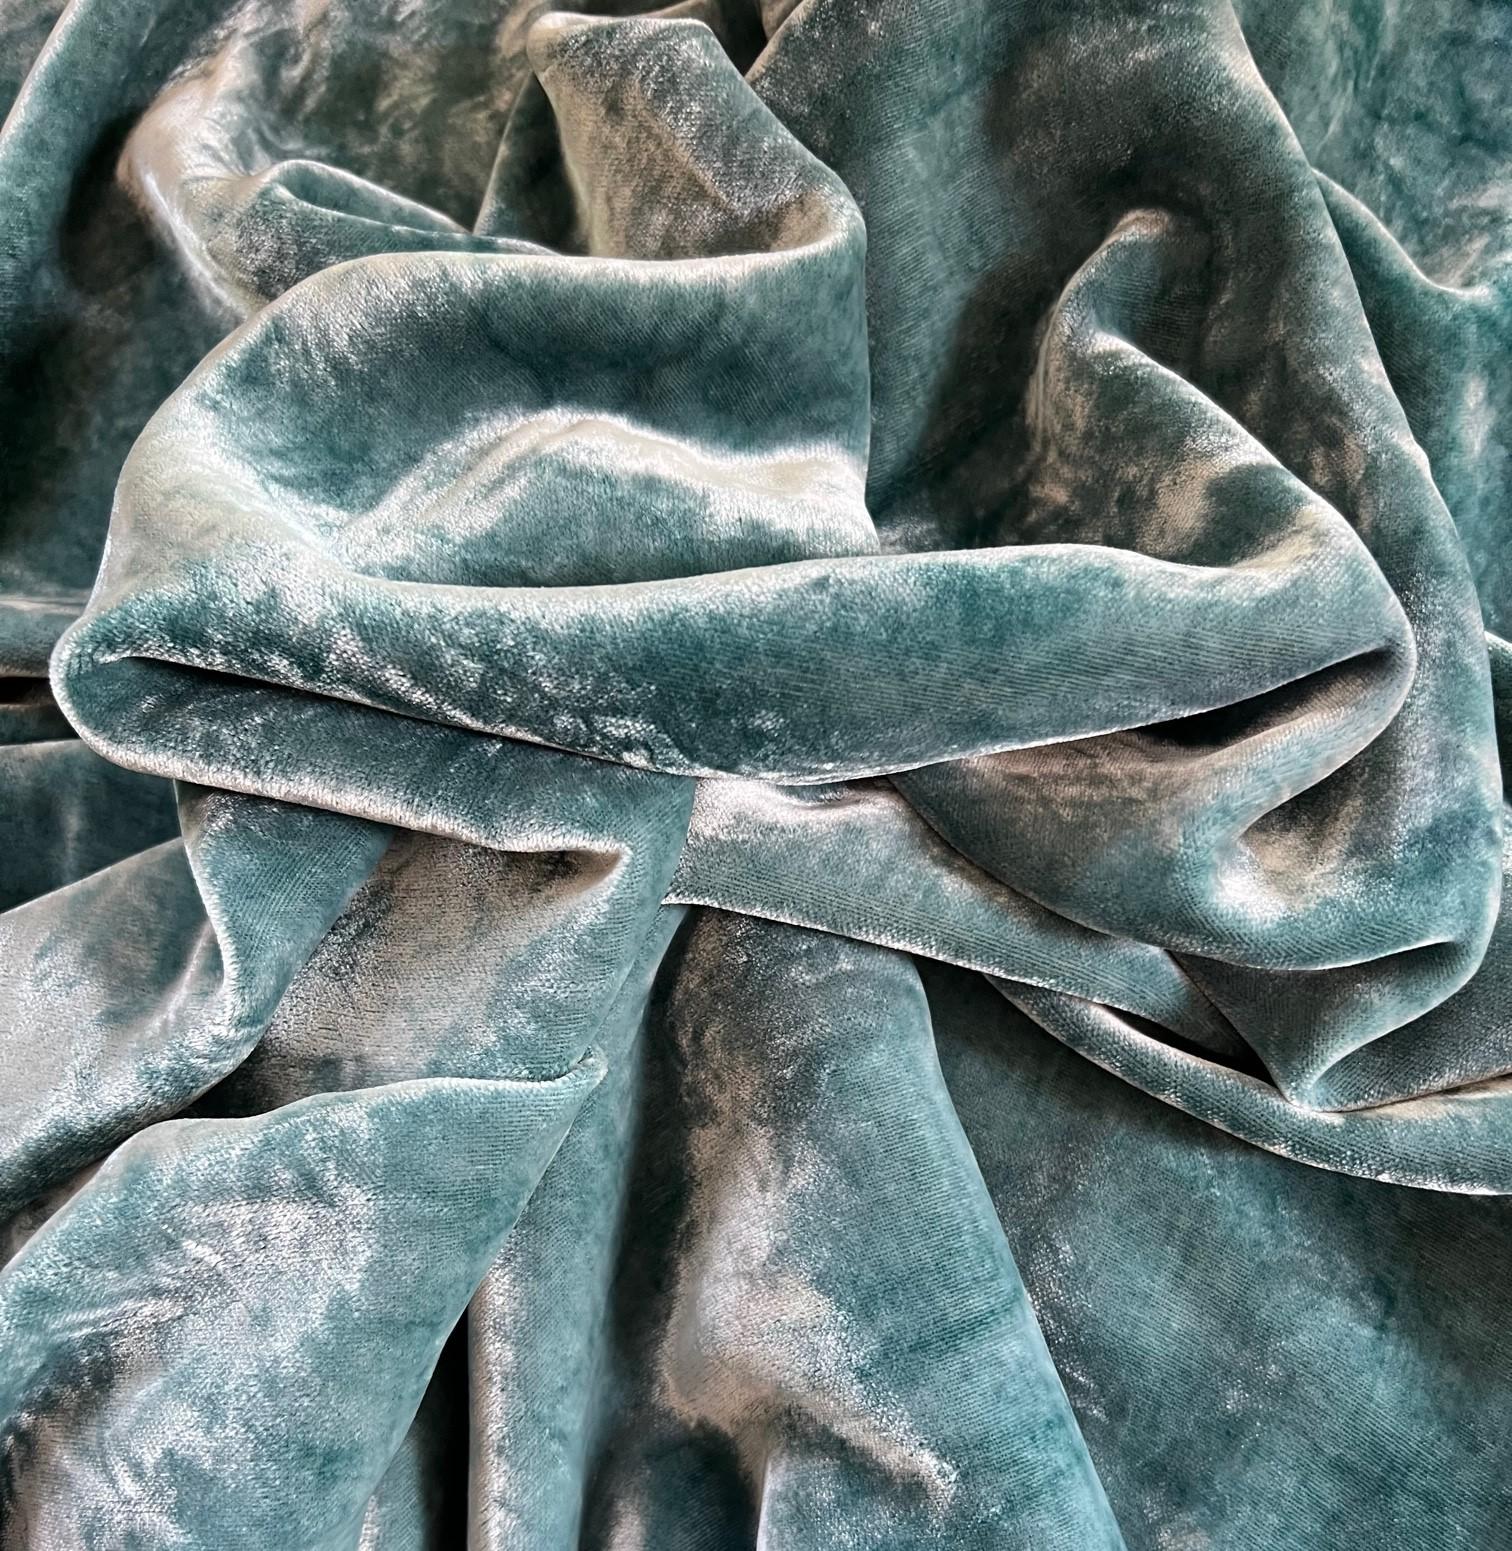 Soft and Tactile Hand Dyed Fortuny Silk Velvet in Teal - 2.25 yards In Good Condition For Sale In Morristown, NJ